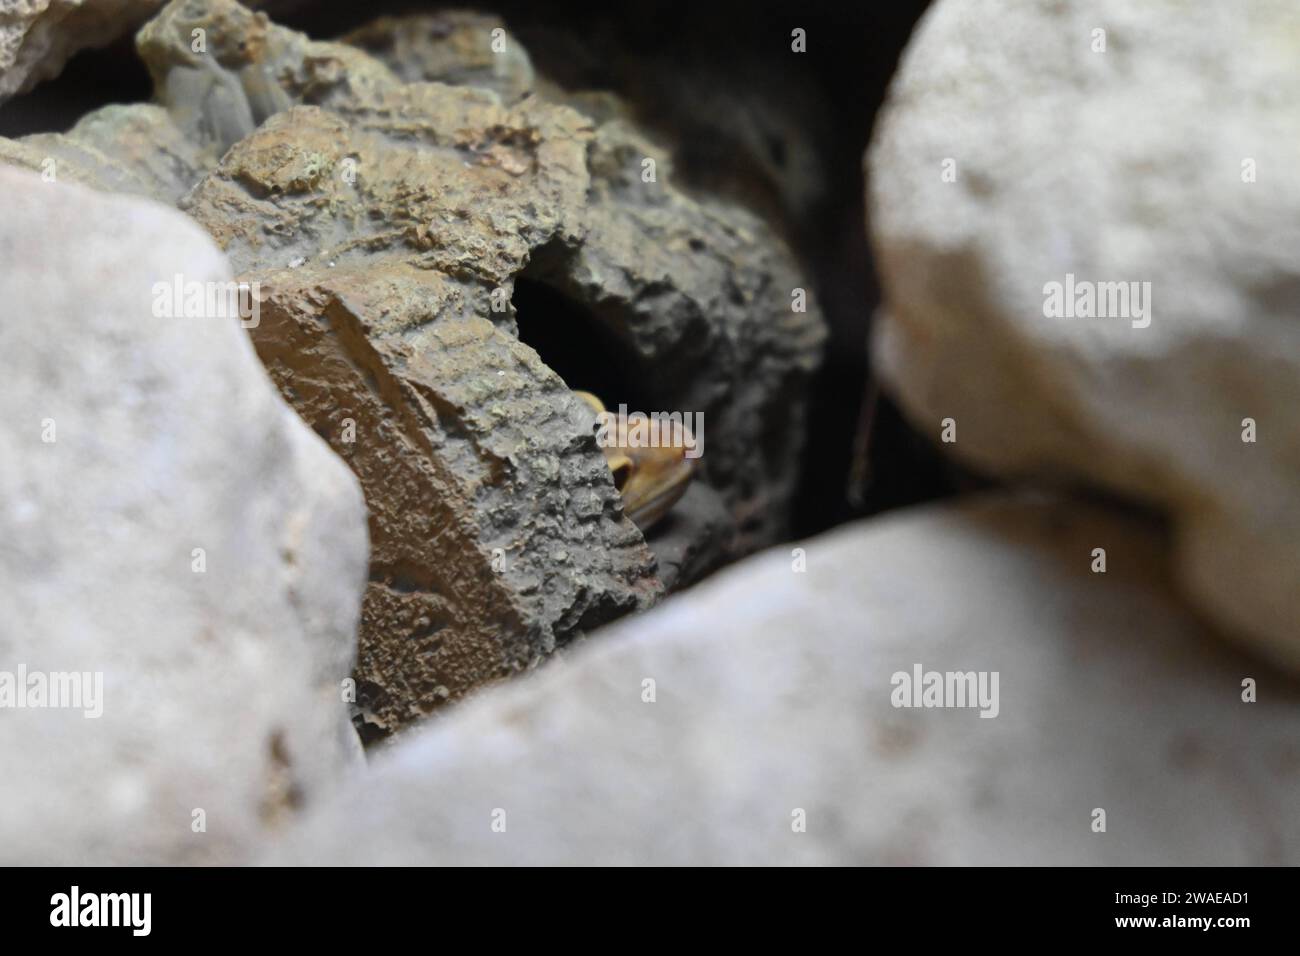 A tiny frog perched atop a pile of rocks and stones on the ground, looking outwards Stock Photo